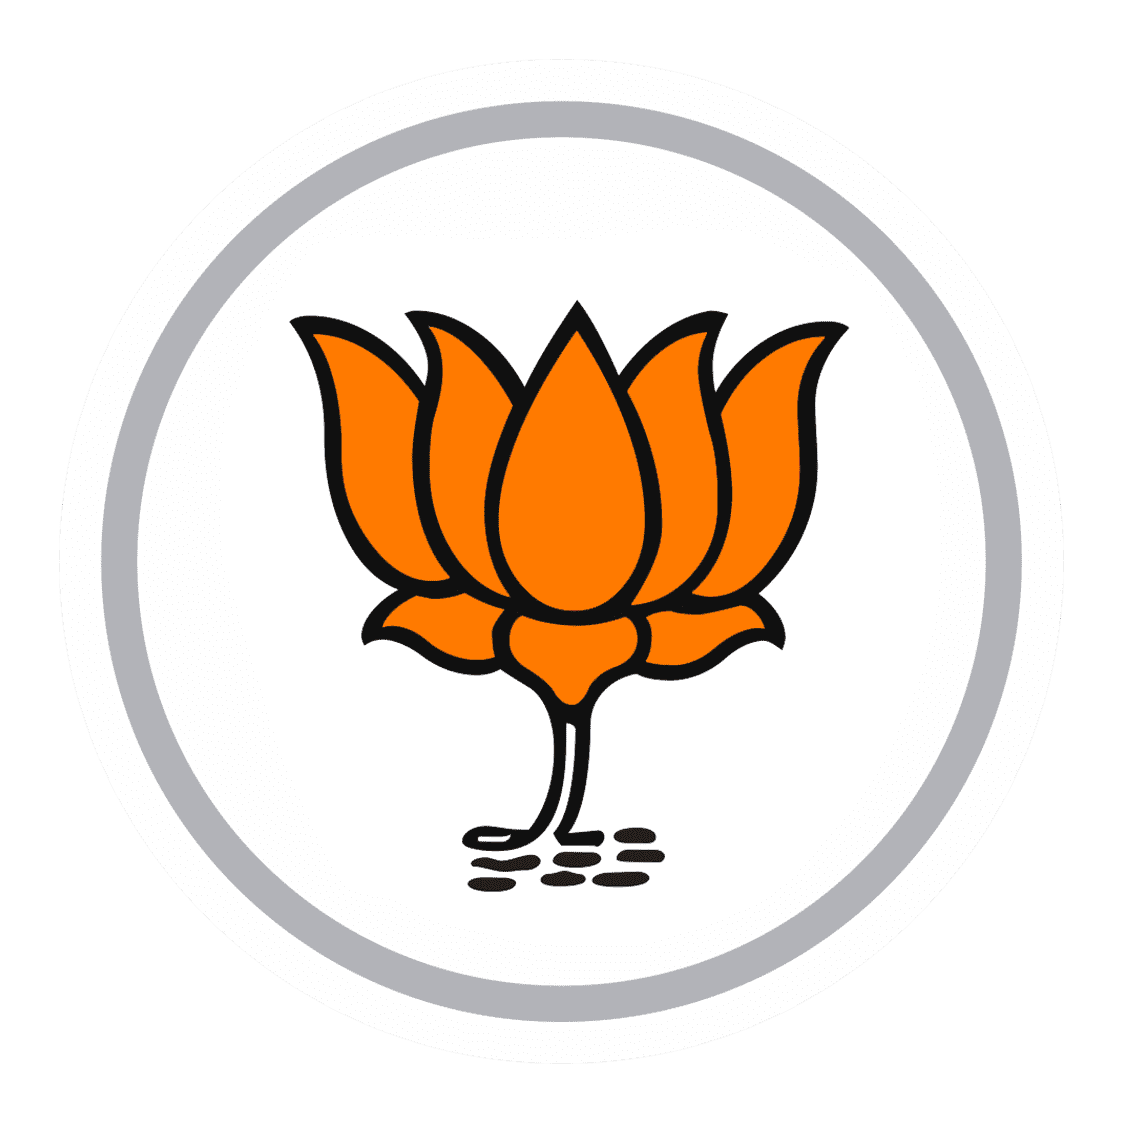 BJP Logo Black And White PNG